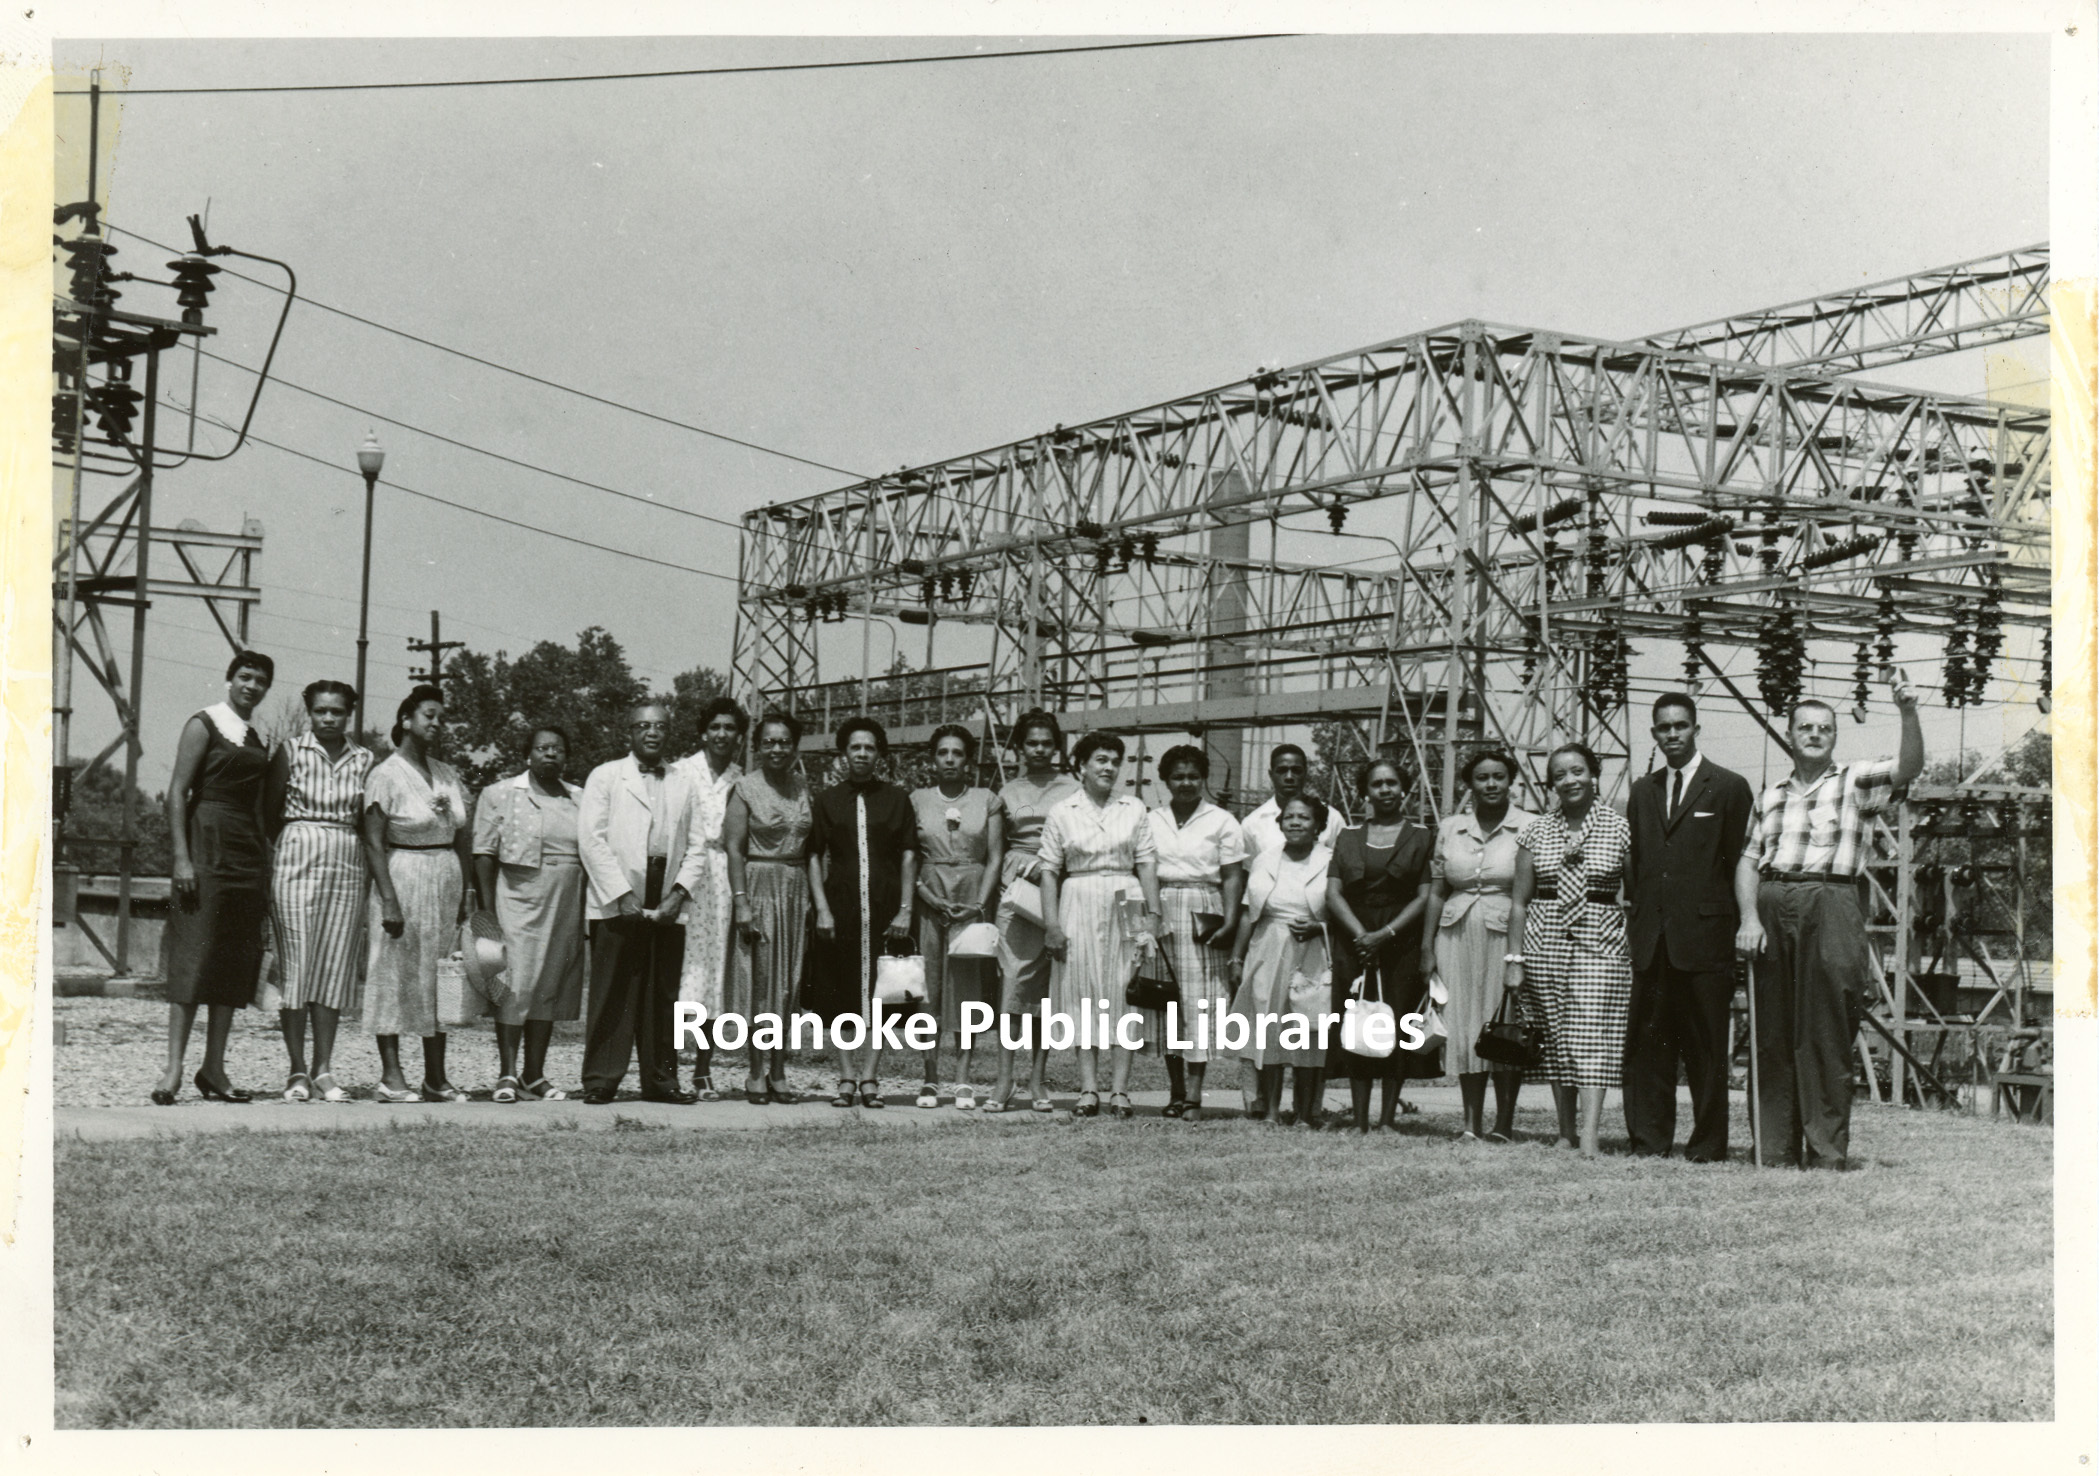 GB077.1 Unidentified Group in front of a Transformer Station.jpg